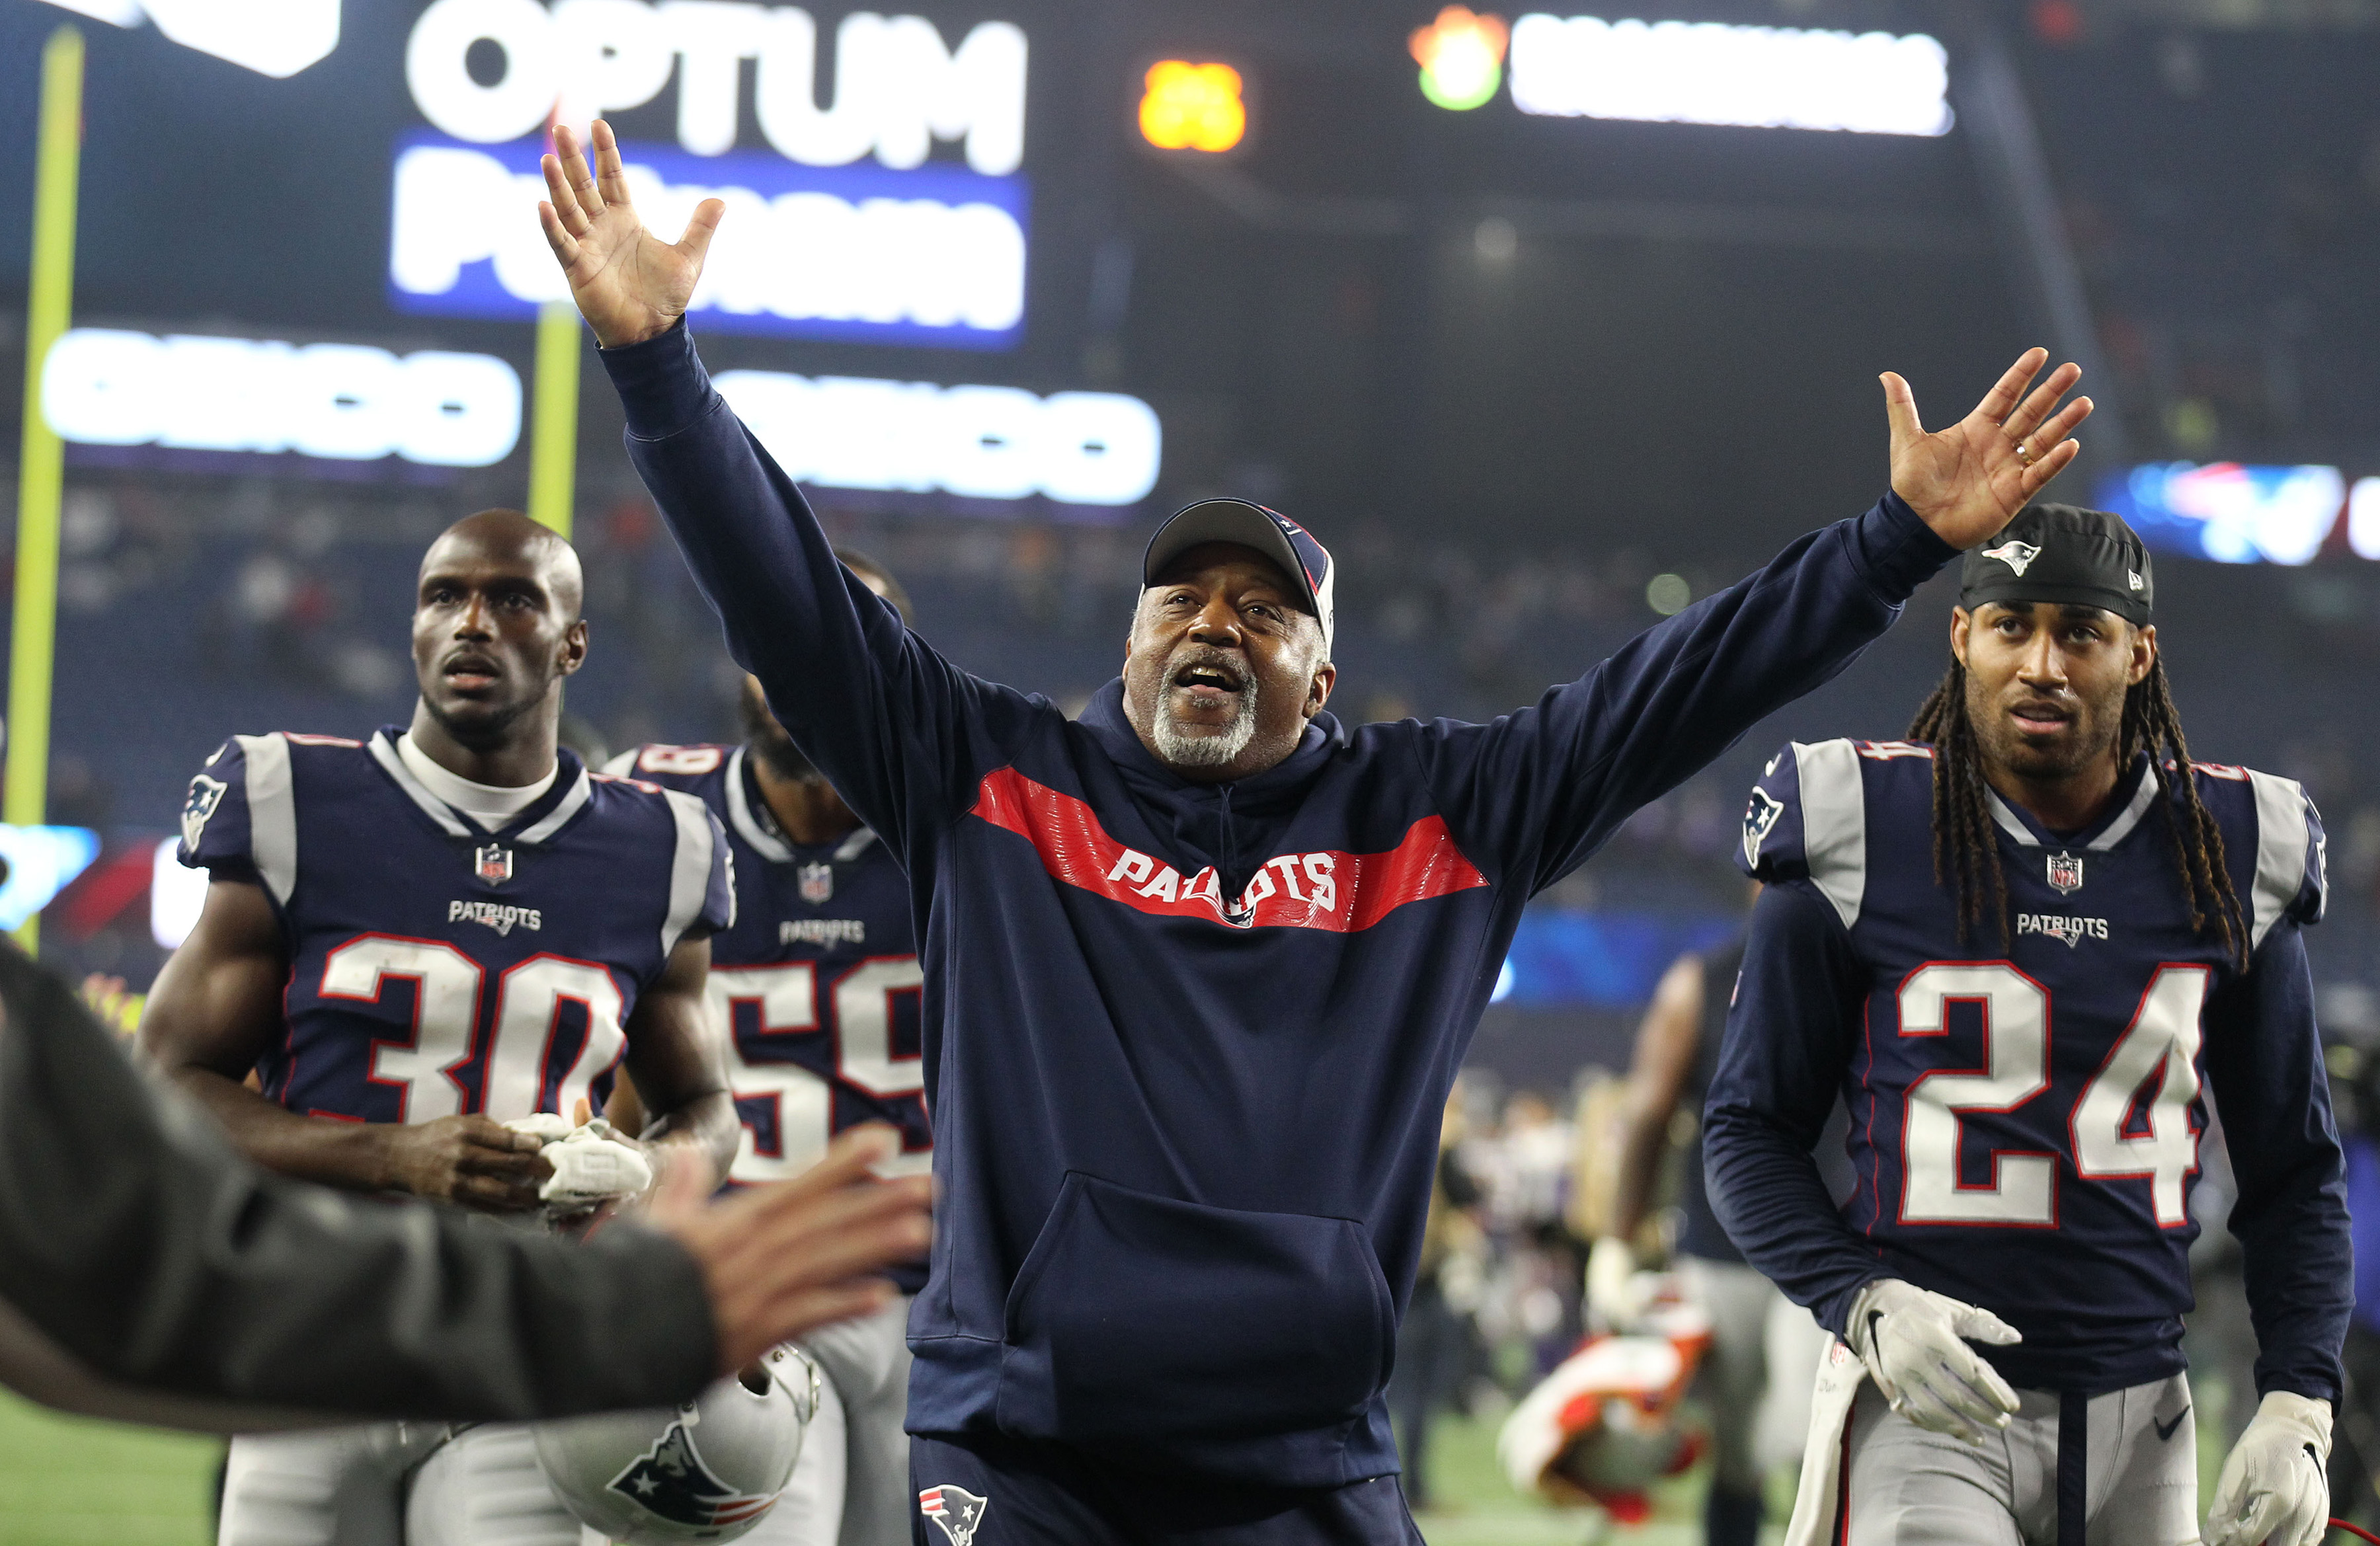 Dec 2, 2018; Foxborough, MA, USA; New England Patriots running backs coach Ivan Fears celebrates a win over the Minnesota Vikings at Gillette Stadium. Mandatory Credit: Stew Milne-USA TODAY Sports